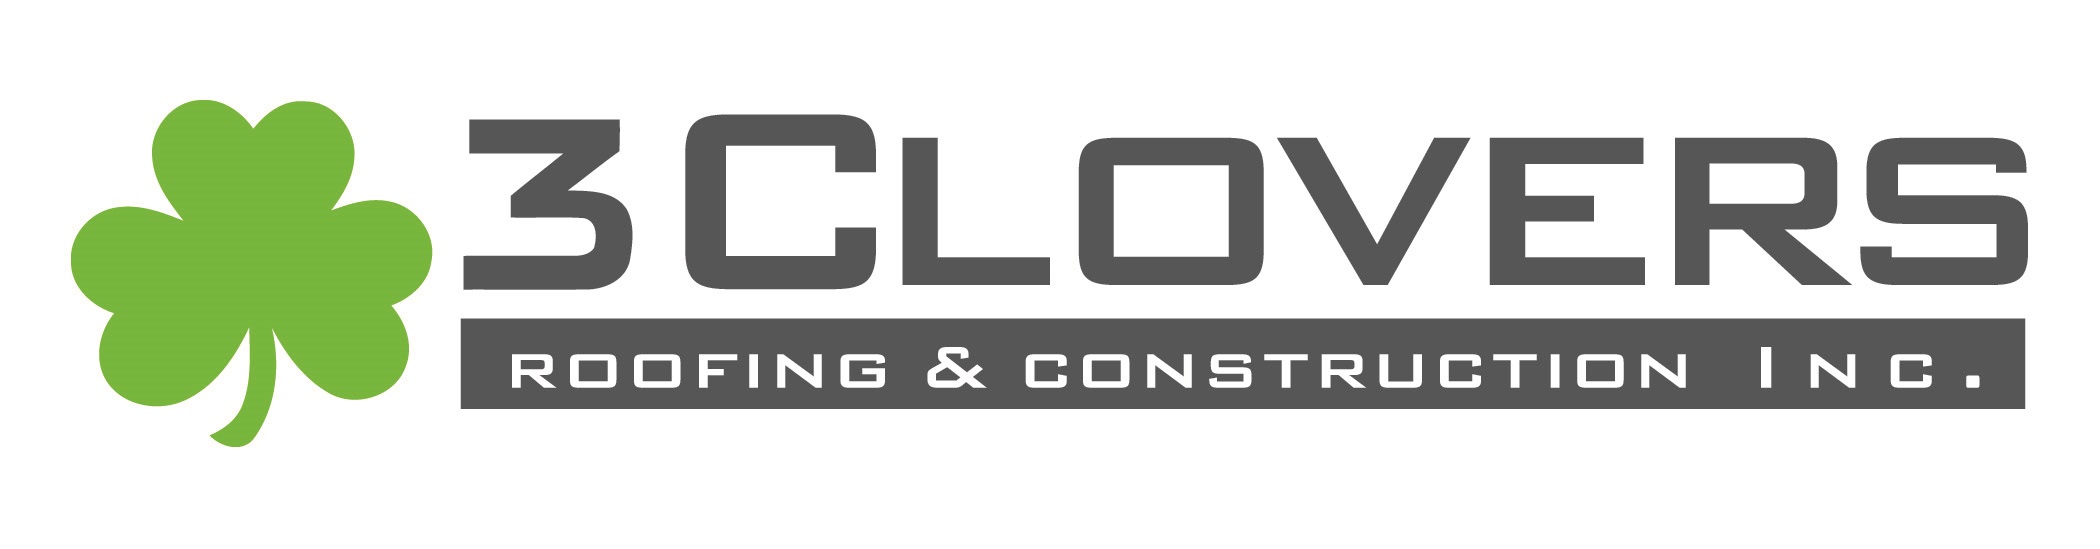 3 Clovers Roofing & Construction, Inc. Logo